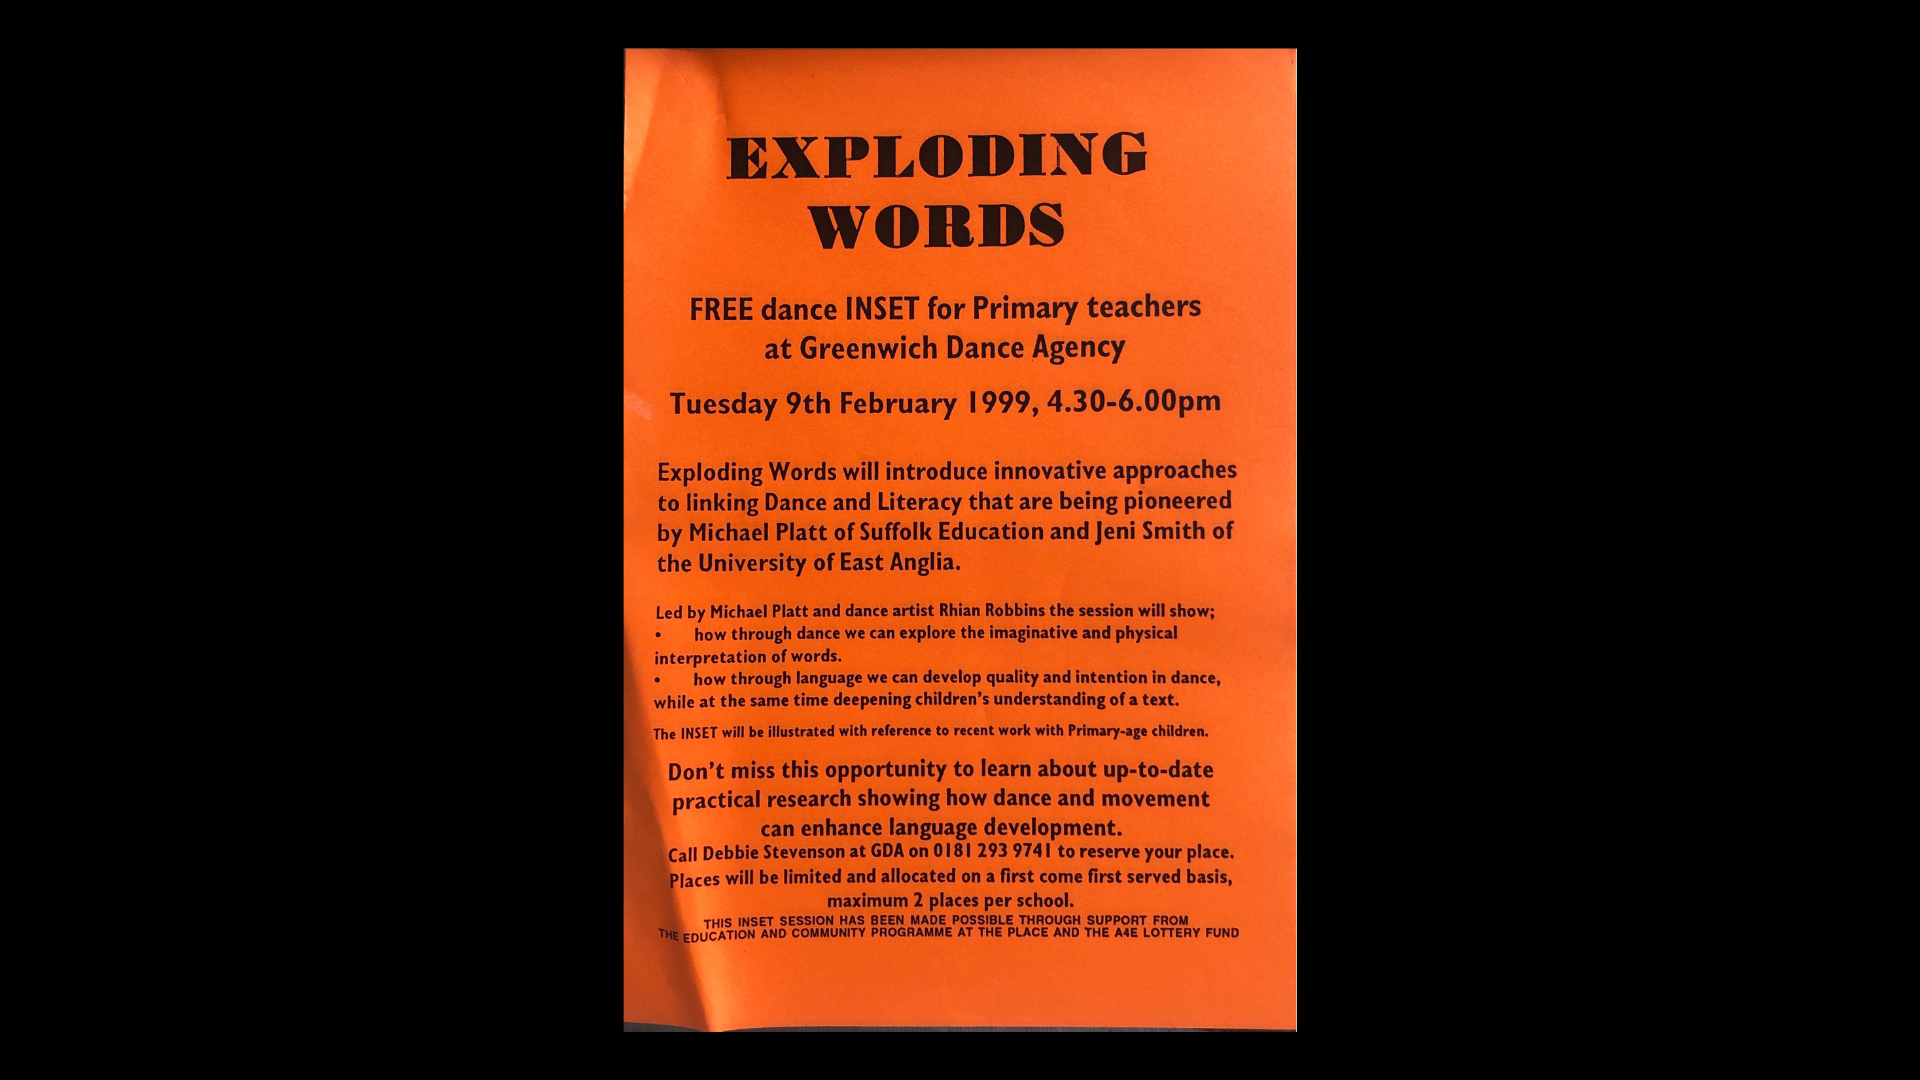 Exploding Words. Free dance INSET for Primary teachers at Greenwich Dance Agency. Tuesday 9th February 1999.